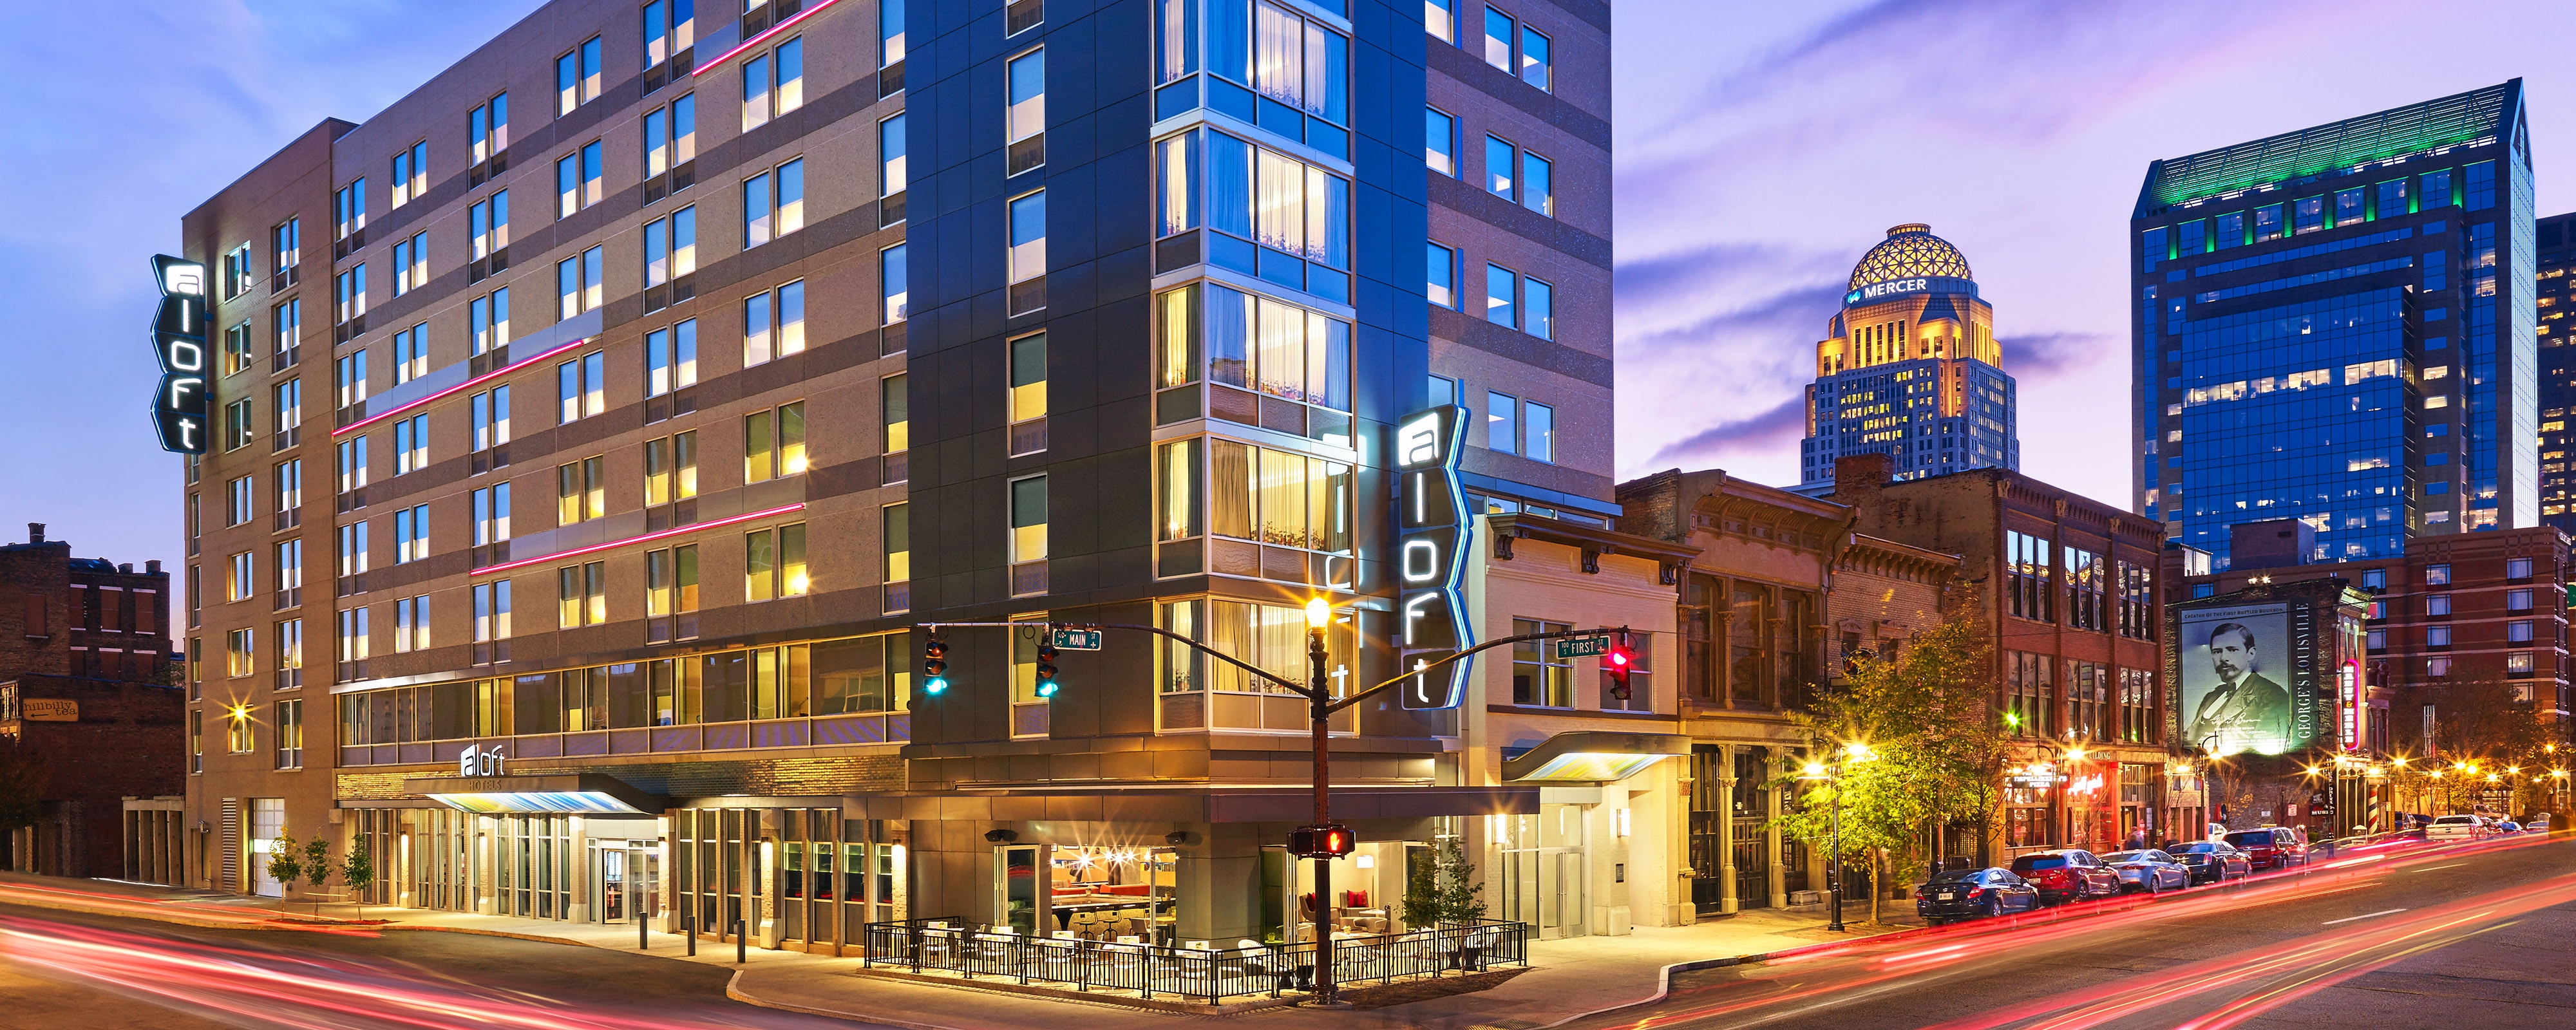 Downtown Louisville Hotel Deals and Promotions | Aloft Louisville Downtown